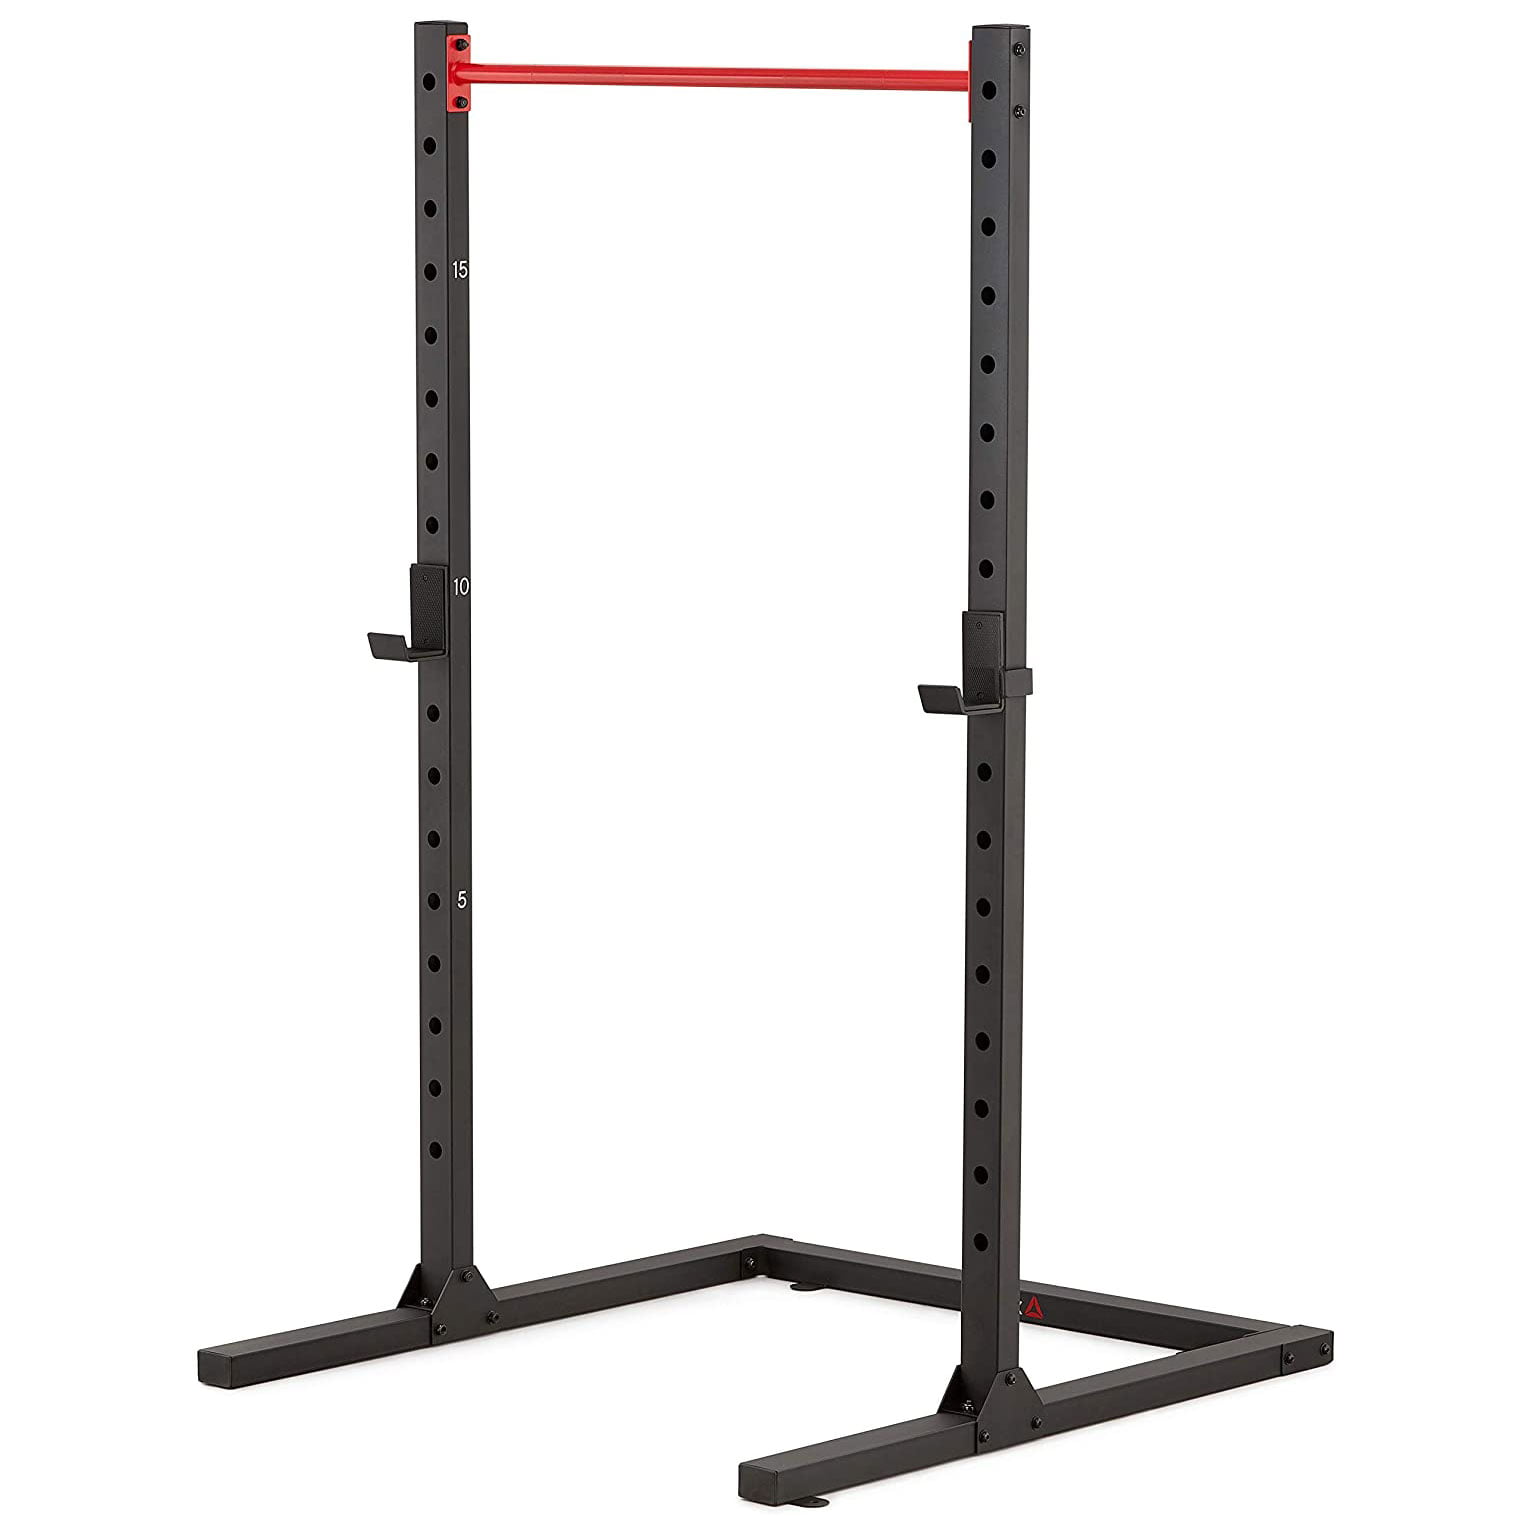 Reebok RBBE-10200 Home Gym Exercise Equipment Workout Weight Squat Stand - Walmart.com